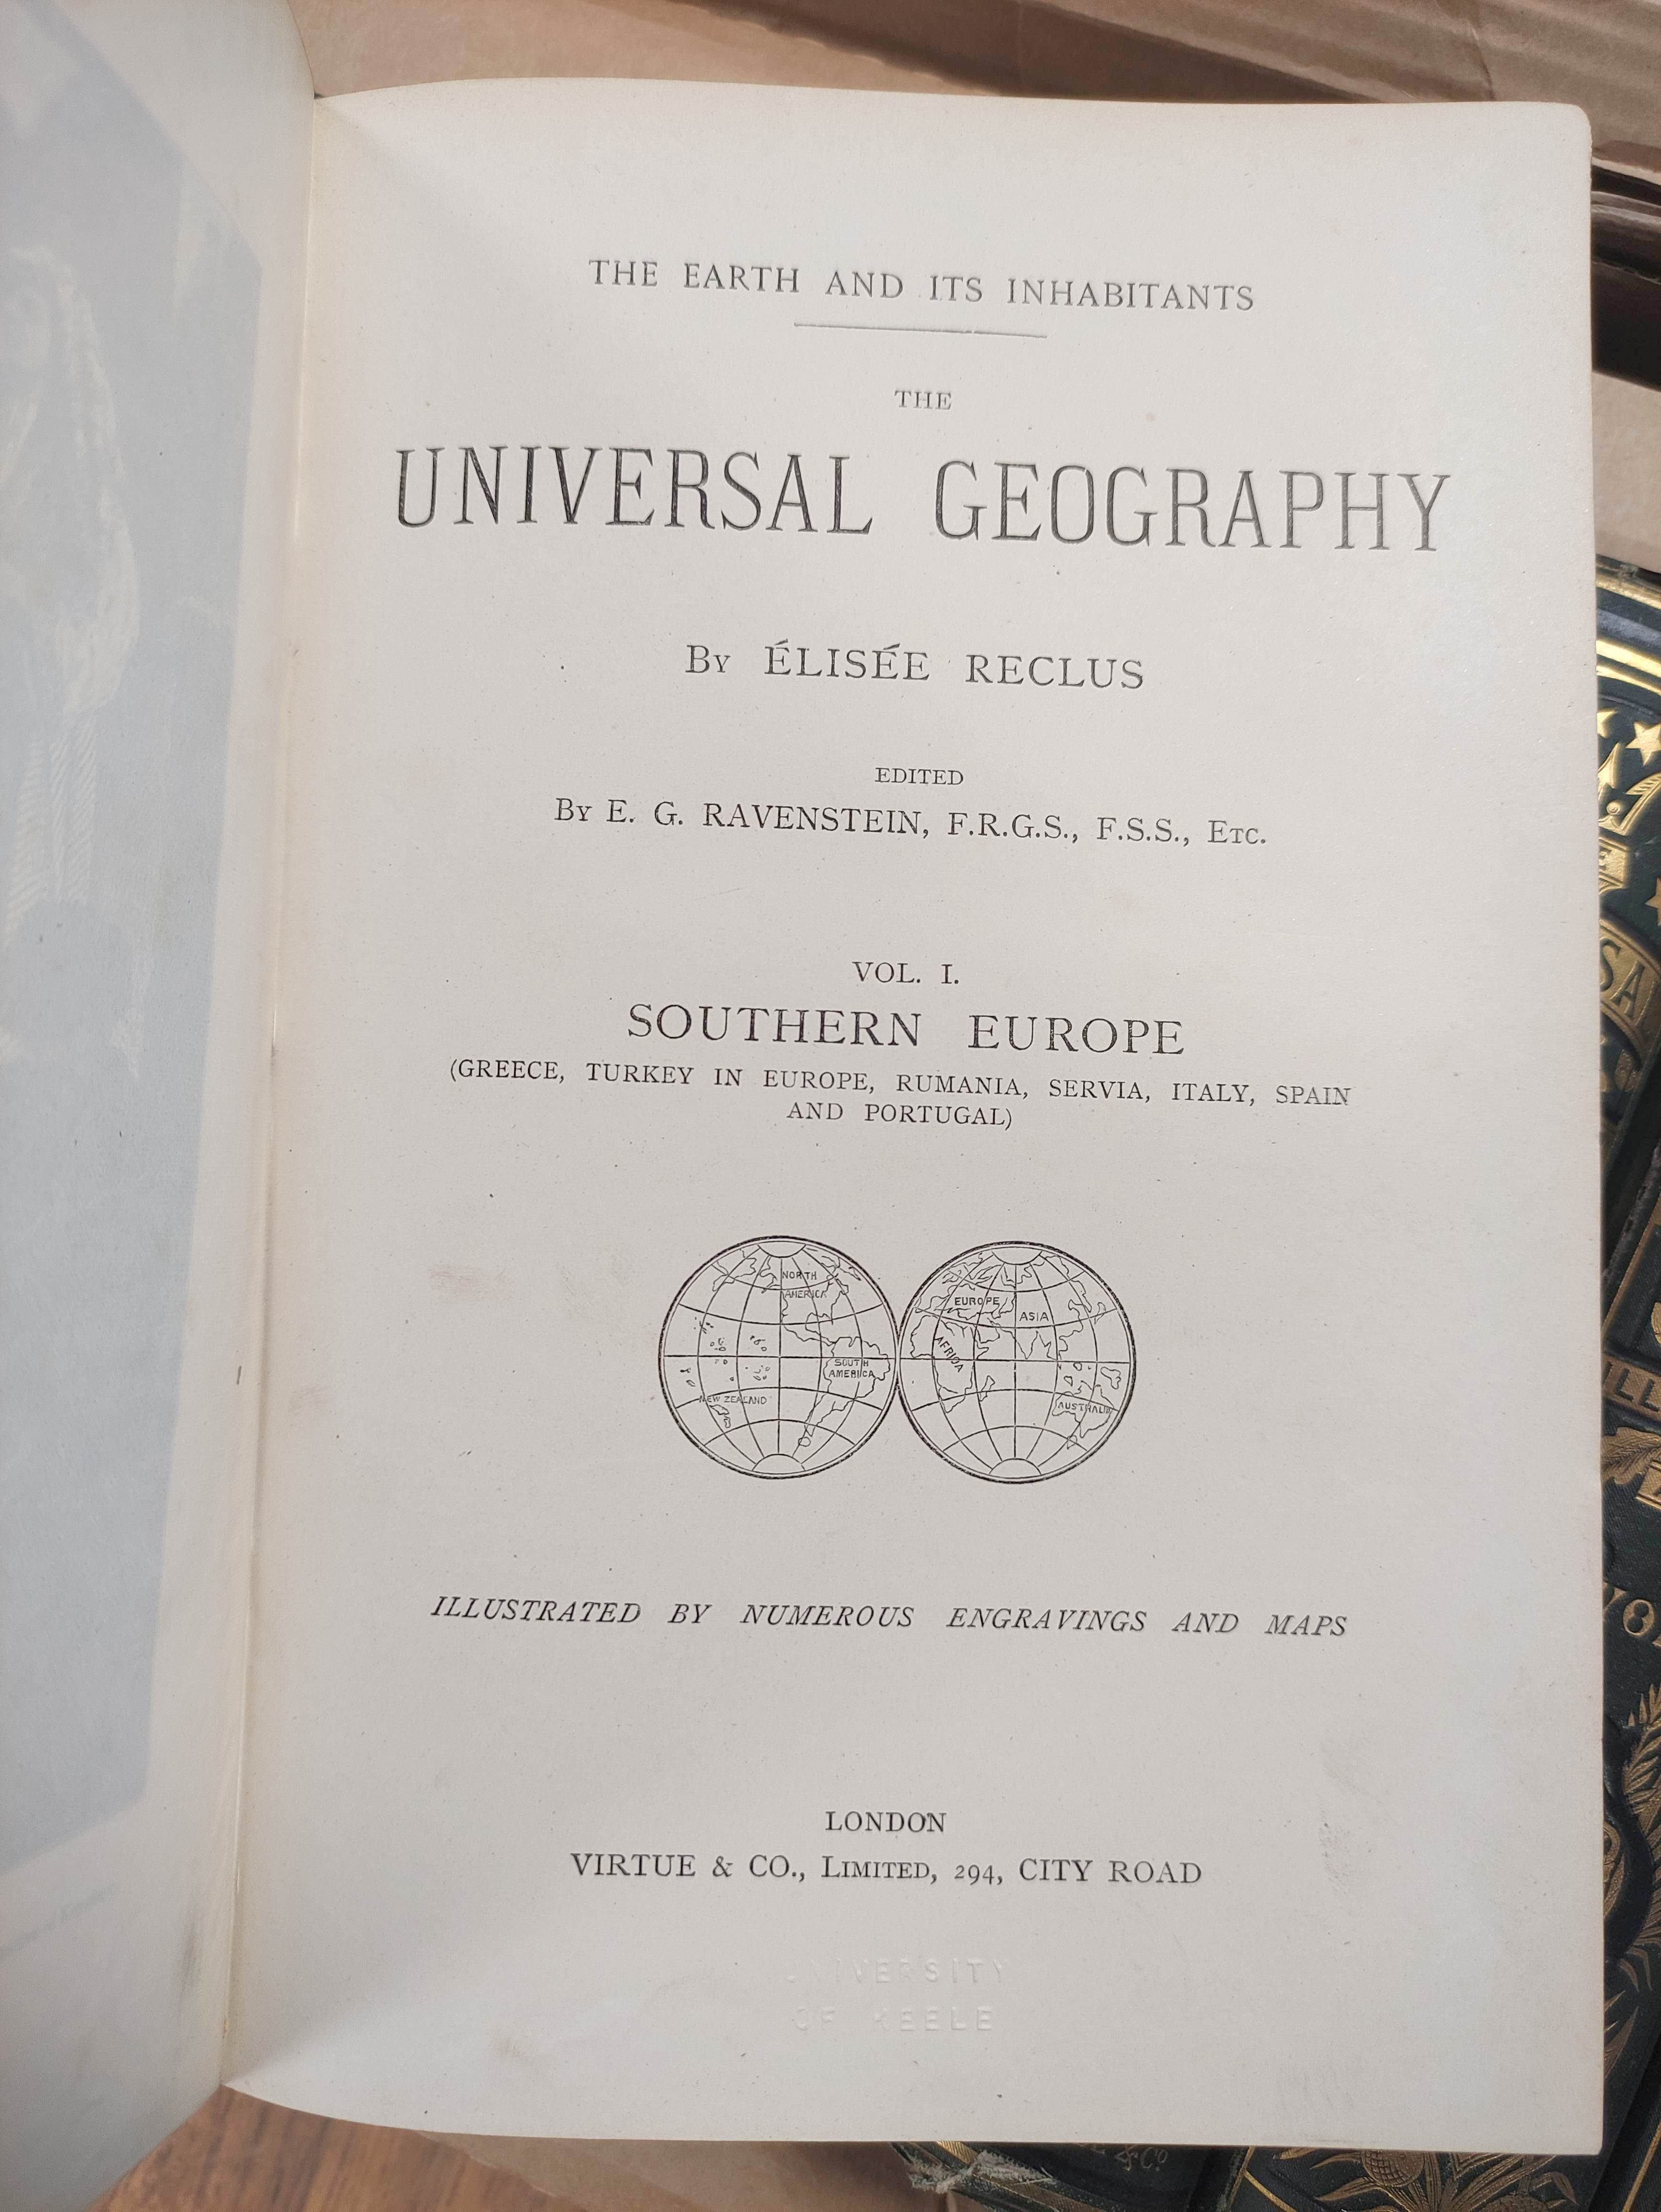 VIRTUE & CO. (Pubs).  The Universal Geography. Vols. 1 to 19. Many maps, plates & illus. Royal - Image 9 of 14